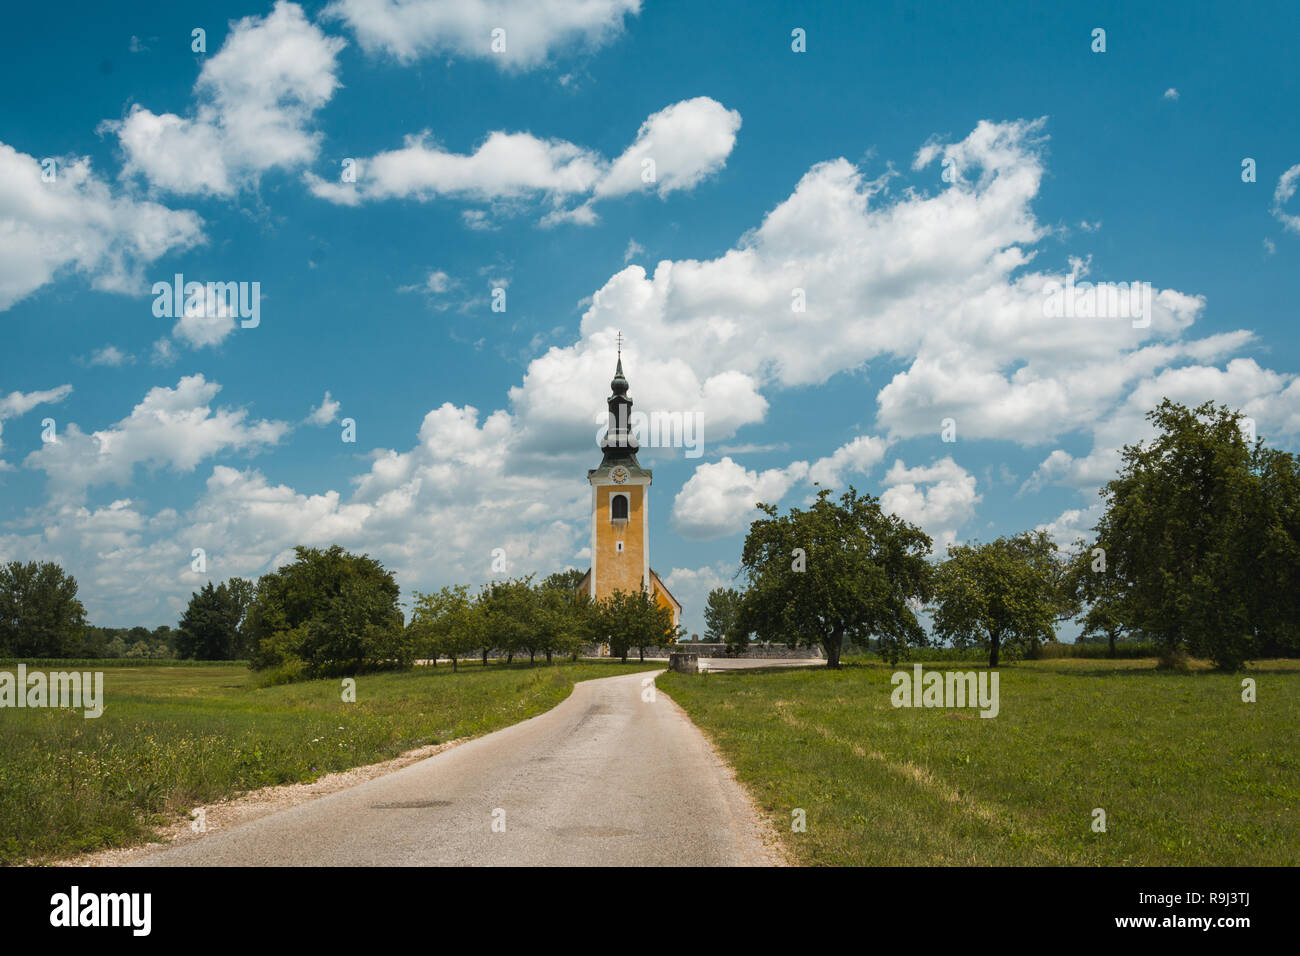 Picturesque countryside church Stock Photo